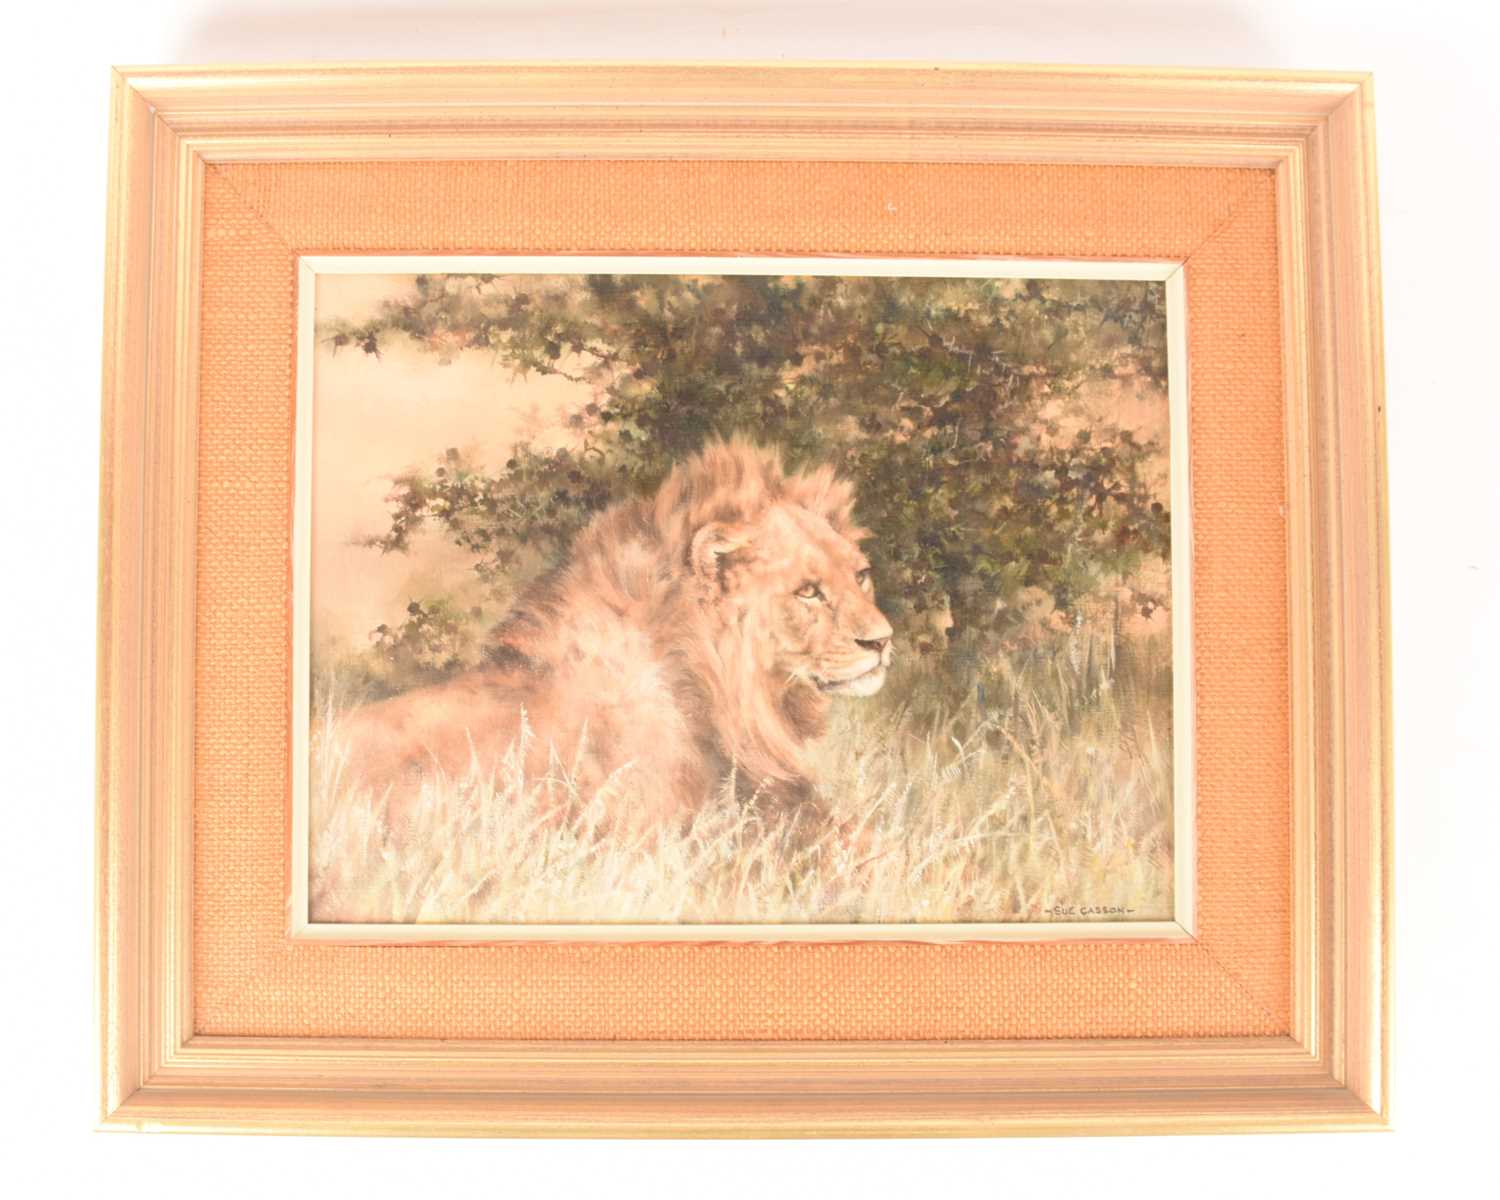 Sue Casson (Mid-Late 20th Century), Lion in grass, signed 'Sue Casson' (lower right), oil on canvas,